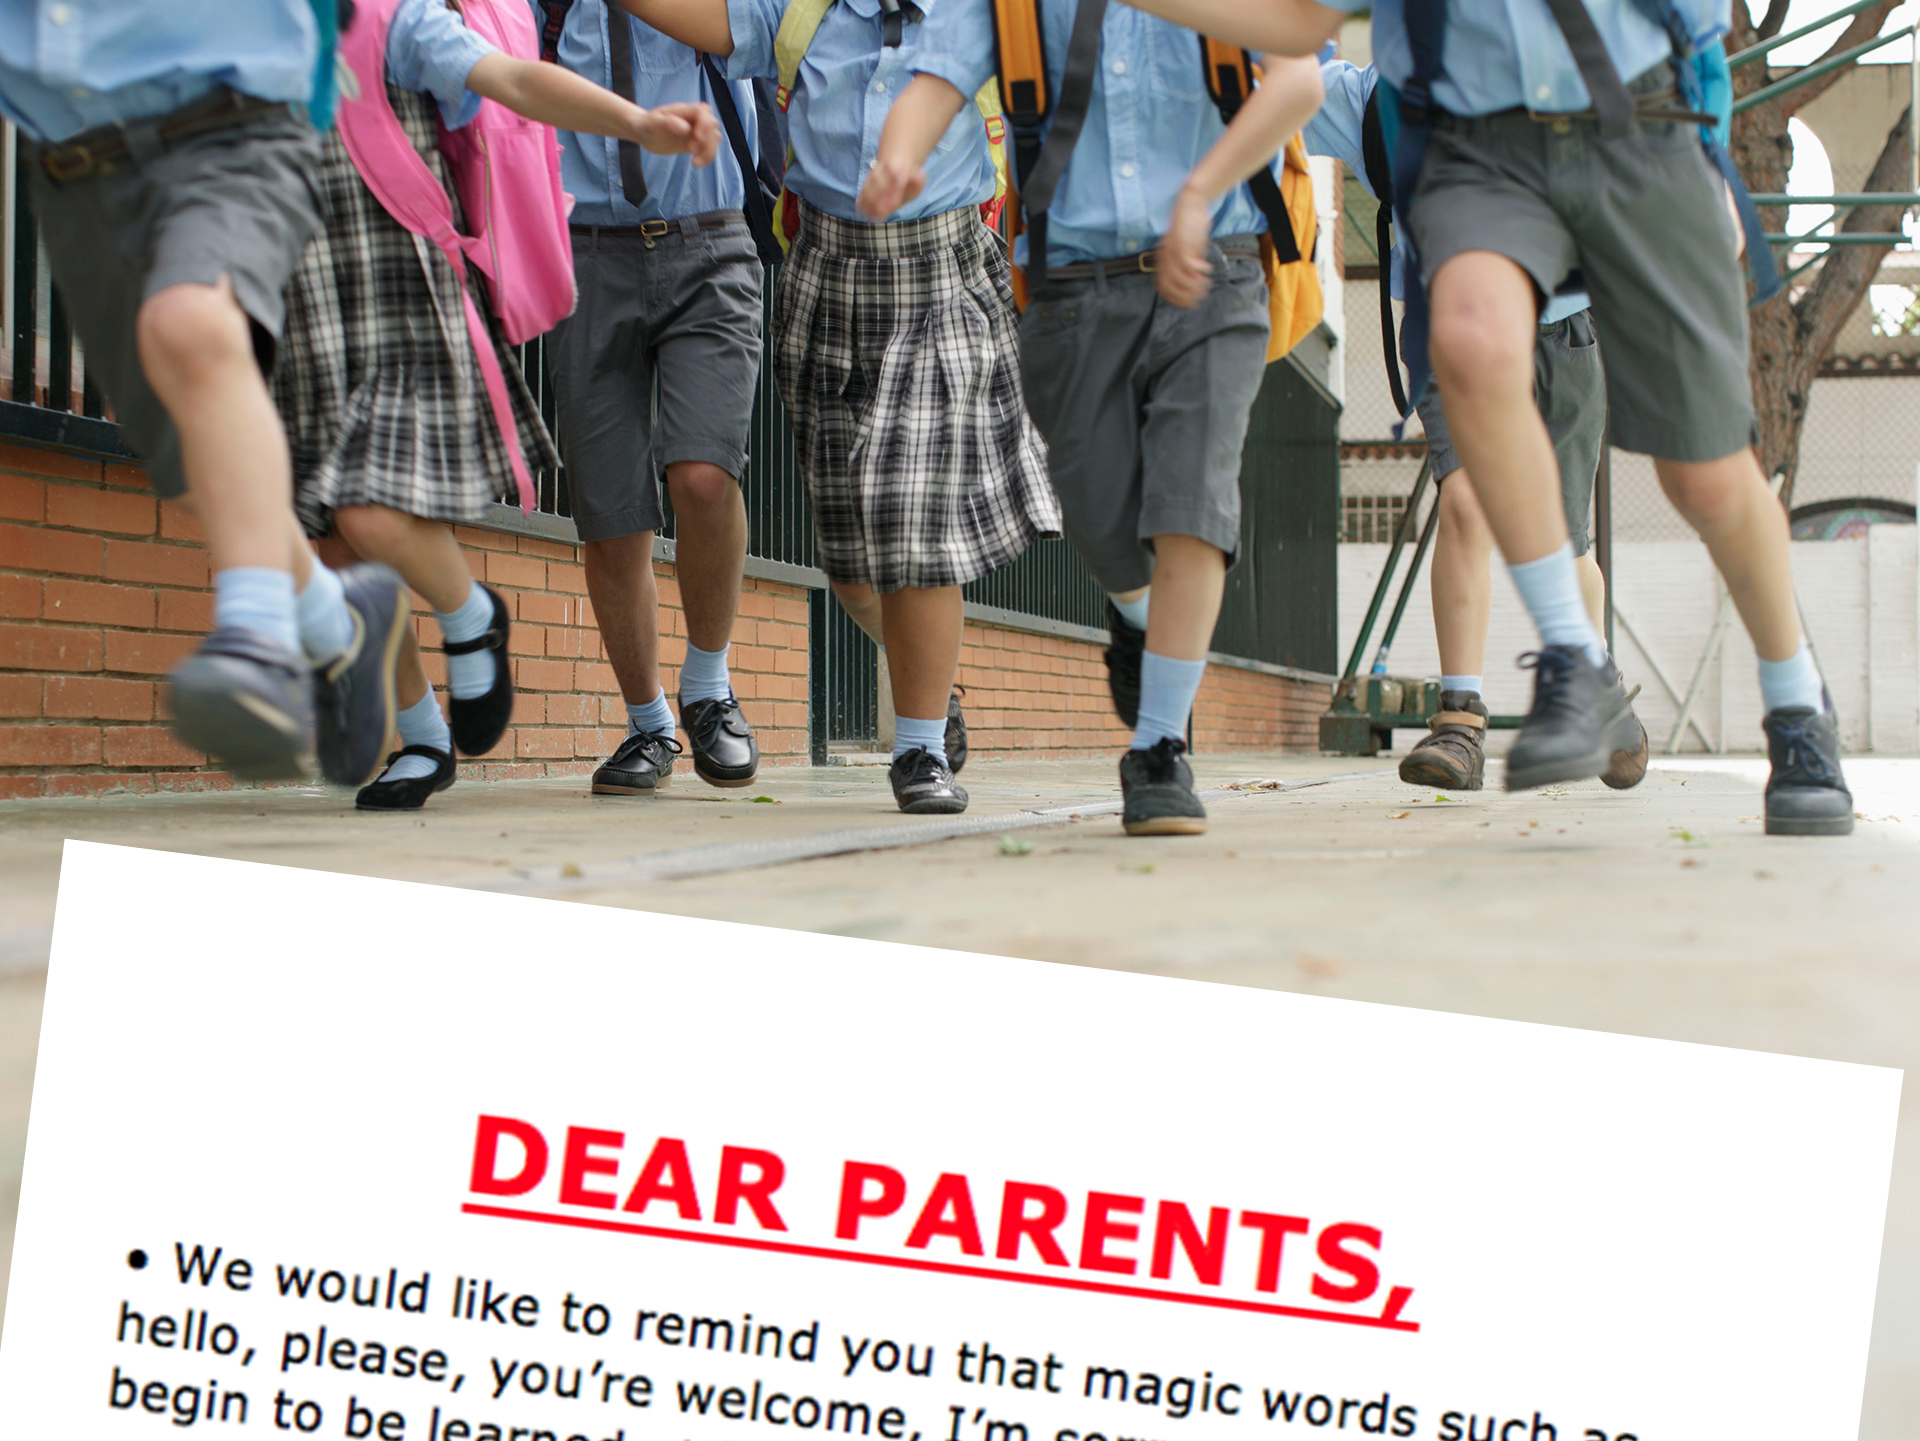 School note directed at parents goes viral